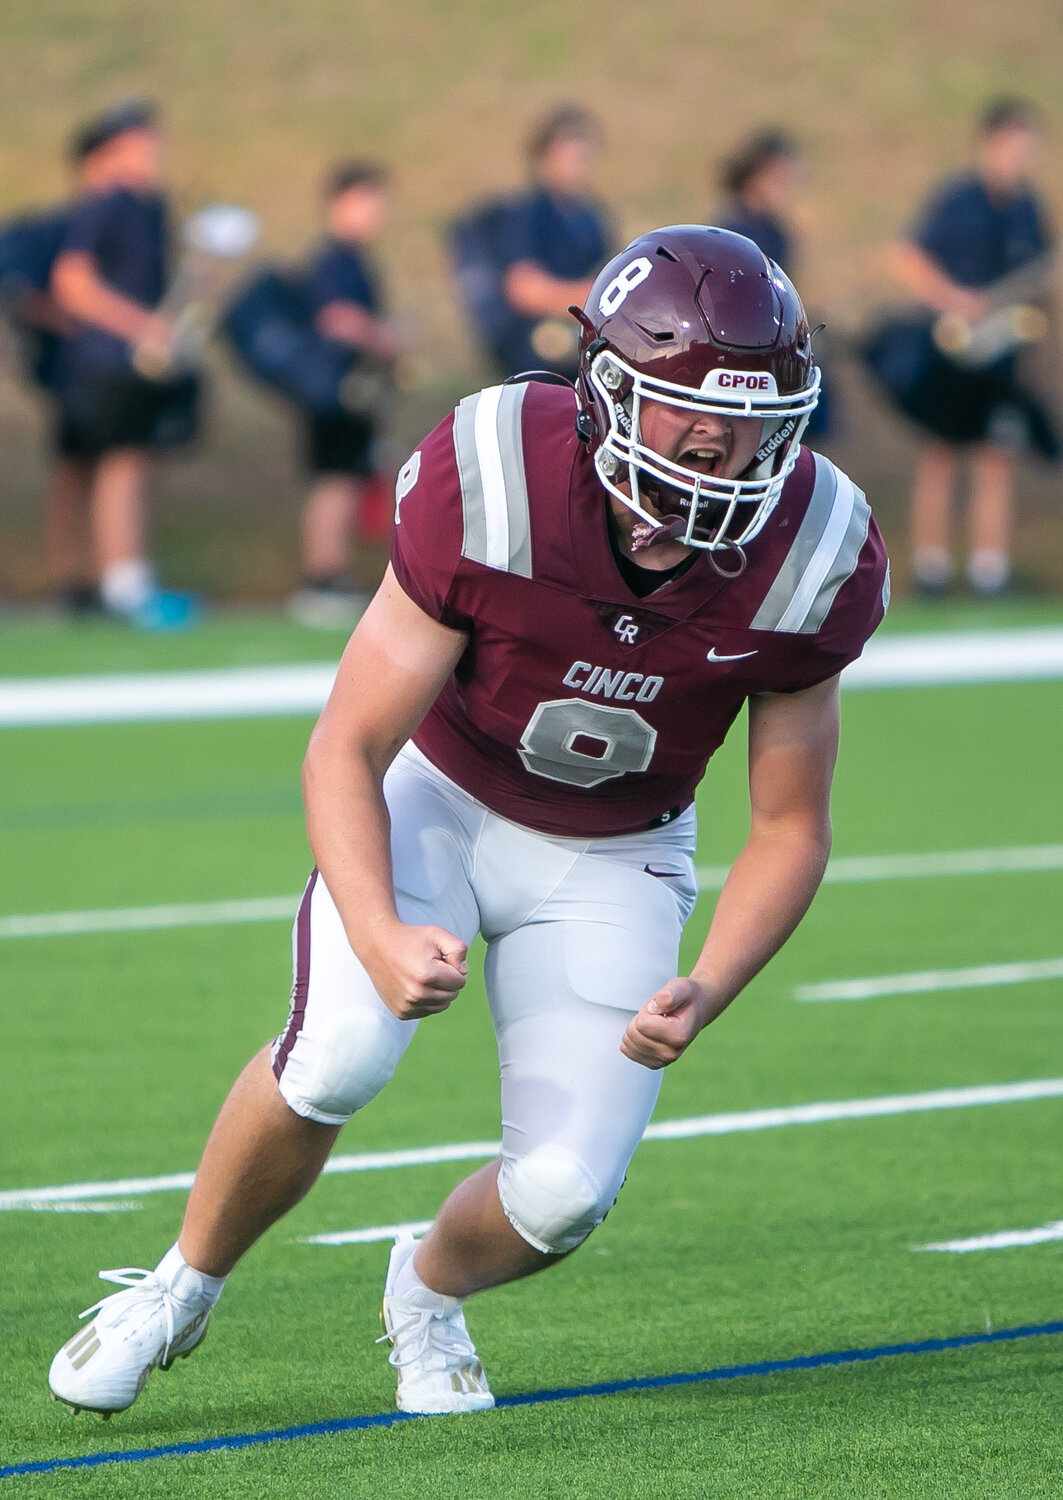 Luke Mathiasmeier celebrates after a play during Friday's game between Cinco Ranch and College Park at Rhodes Stadium.